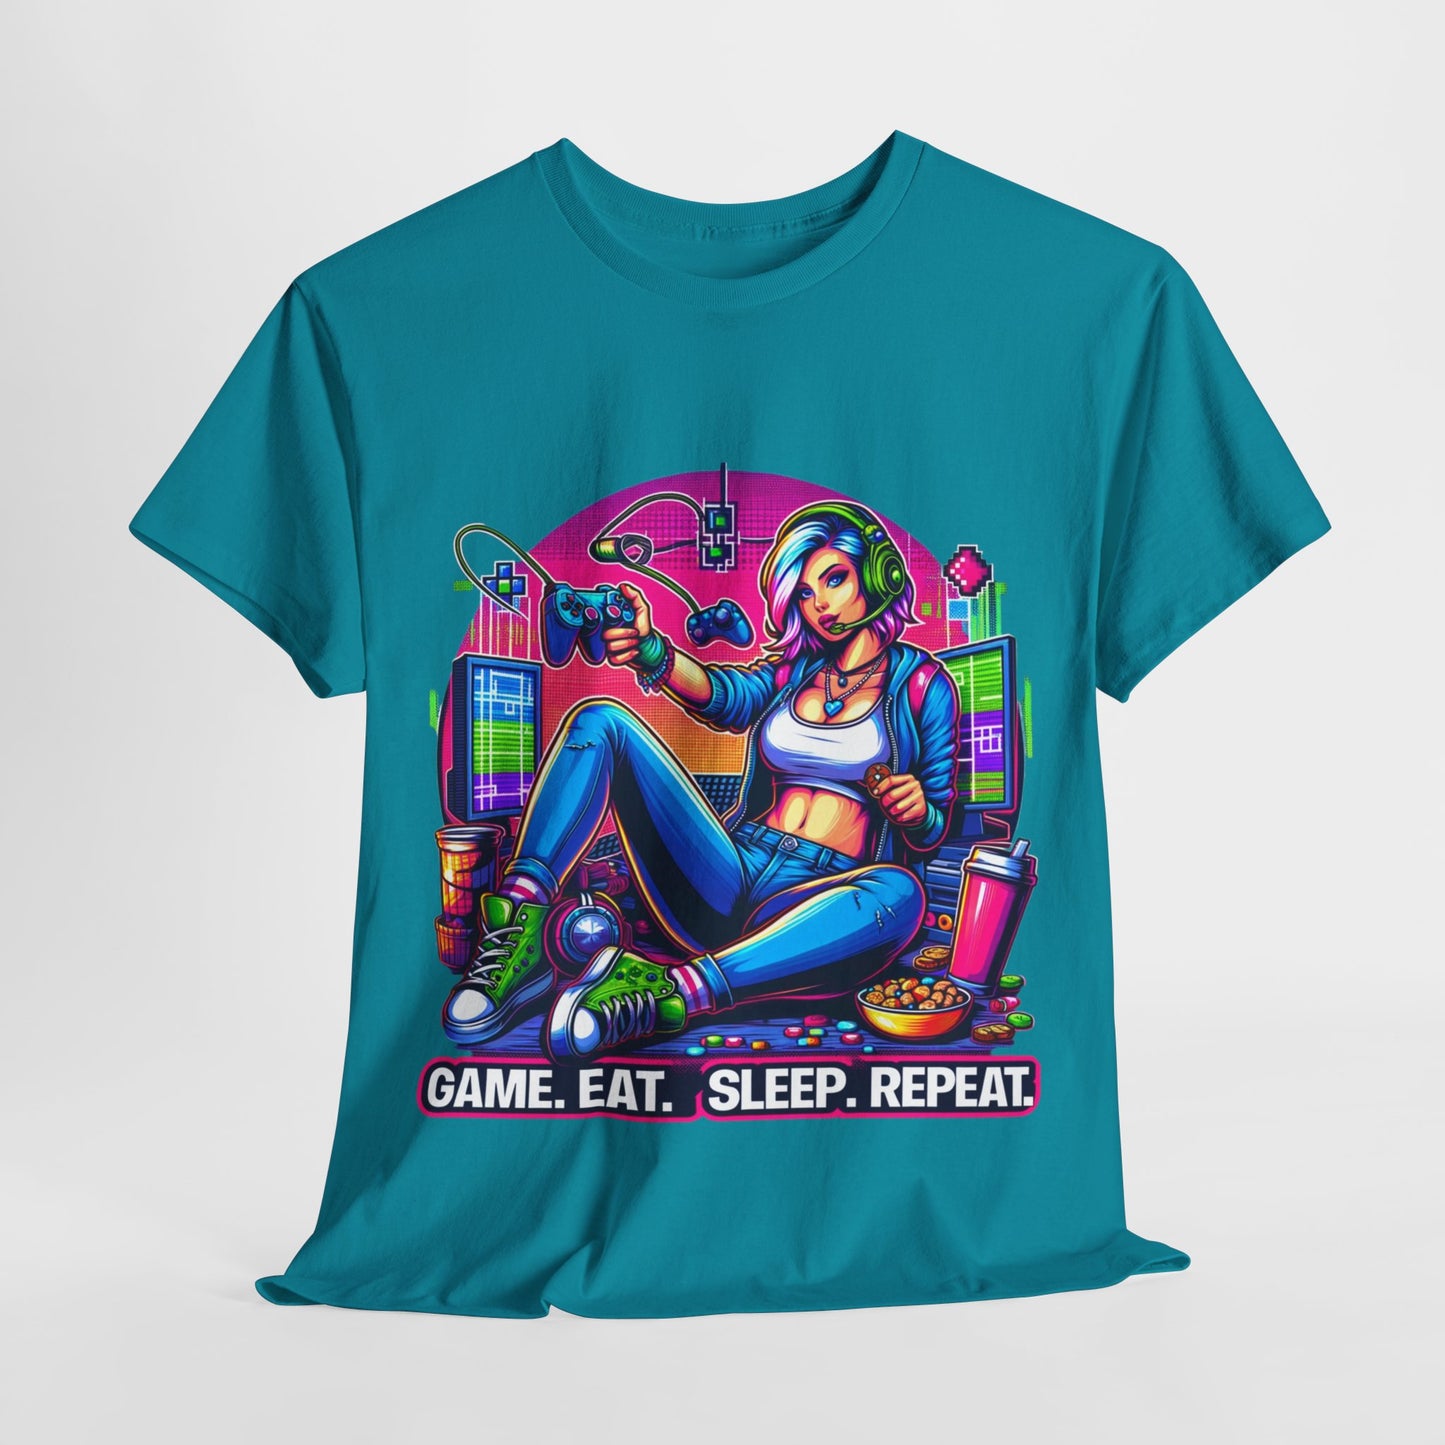 Shop 'Game. Eat. Sleep. Repeat.' T-Shirt - Essential Gamer Gear for Marathon Sessions!